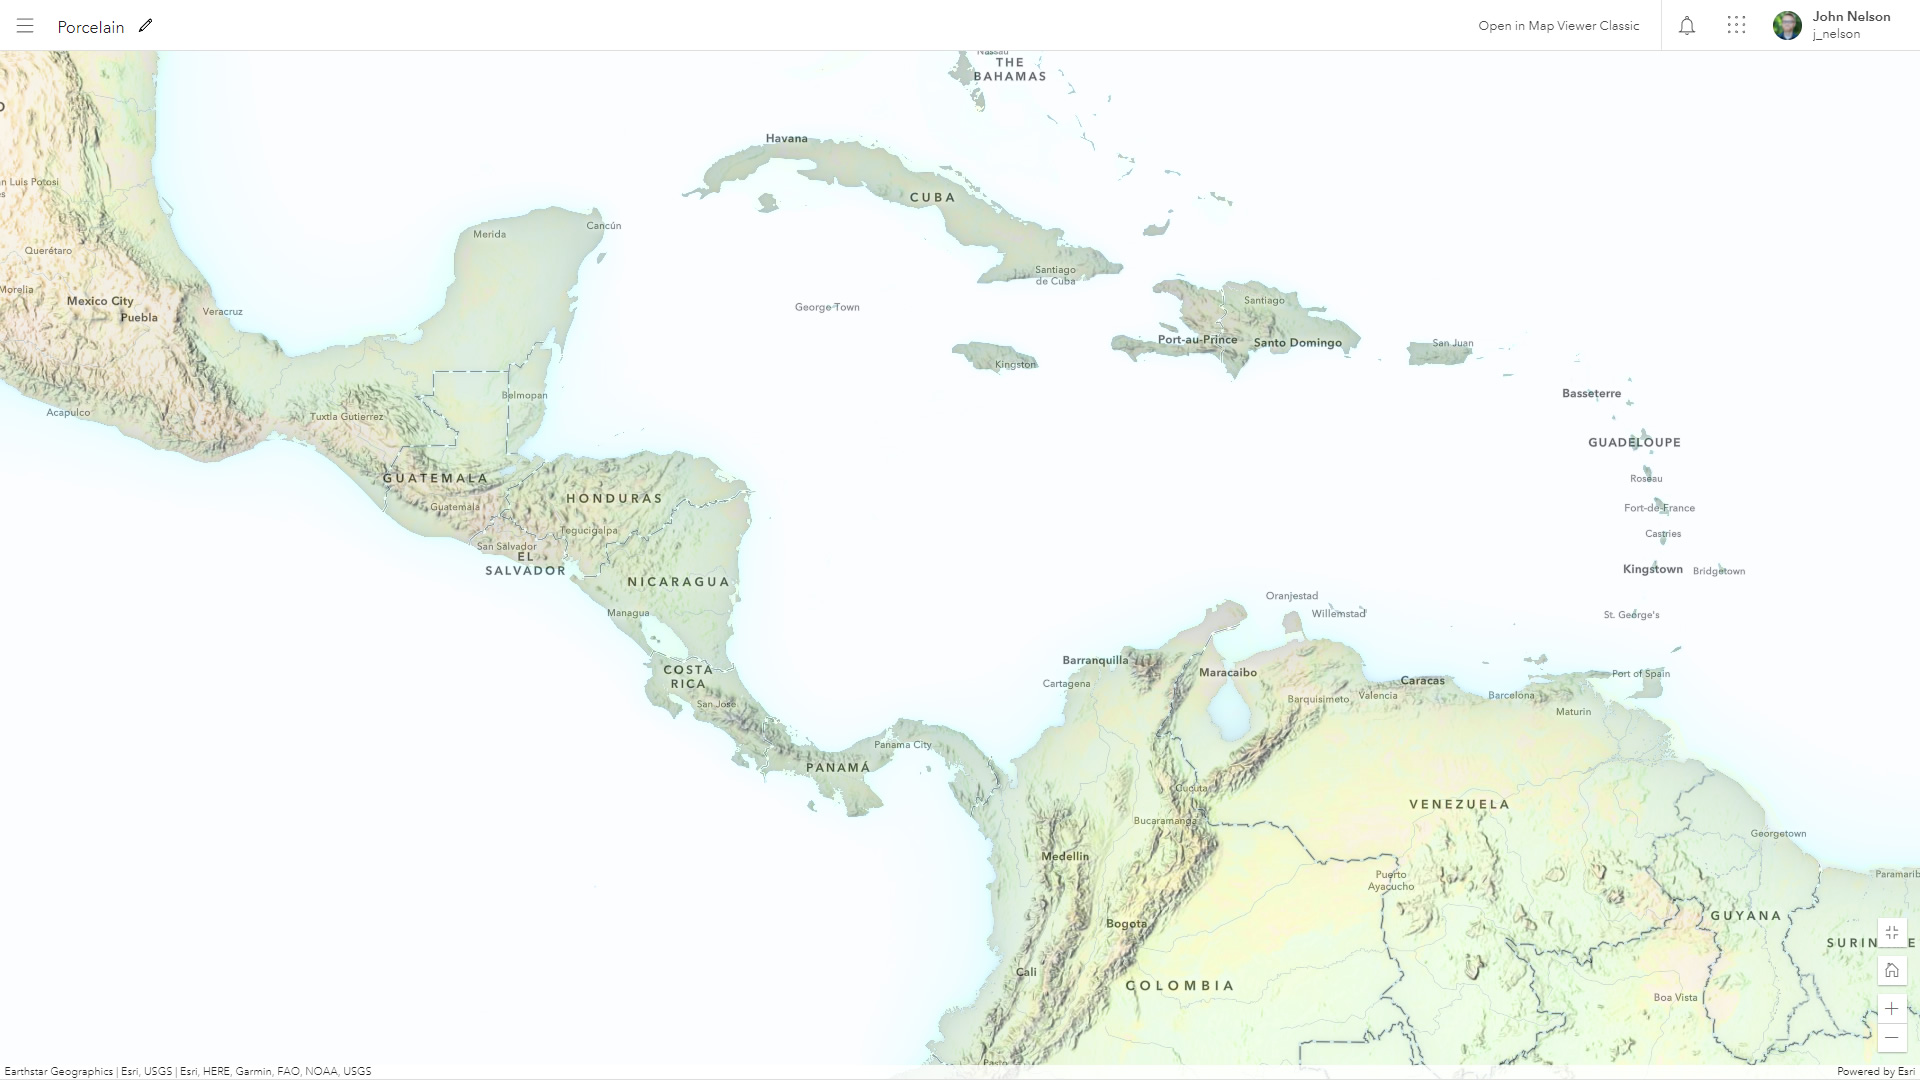 Porcelain style map of Central America